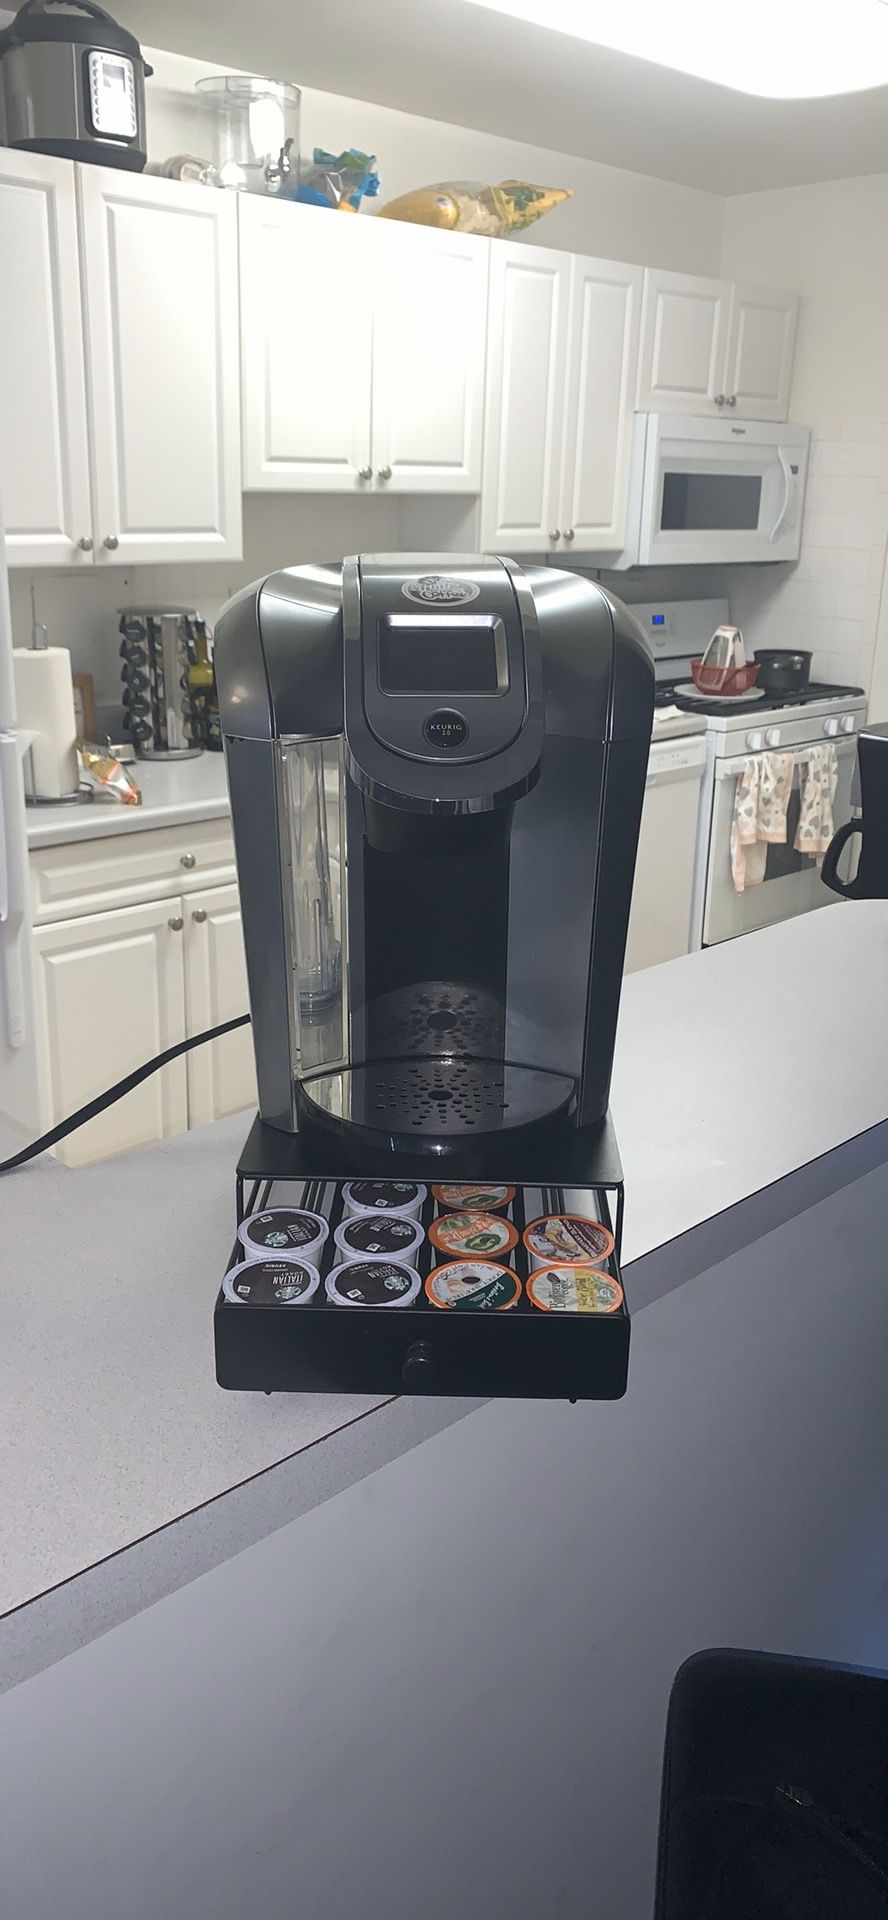 Keurig 2.0 and K-cup stand